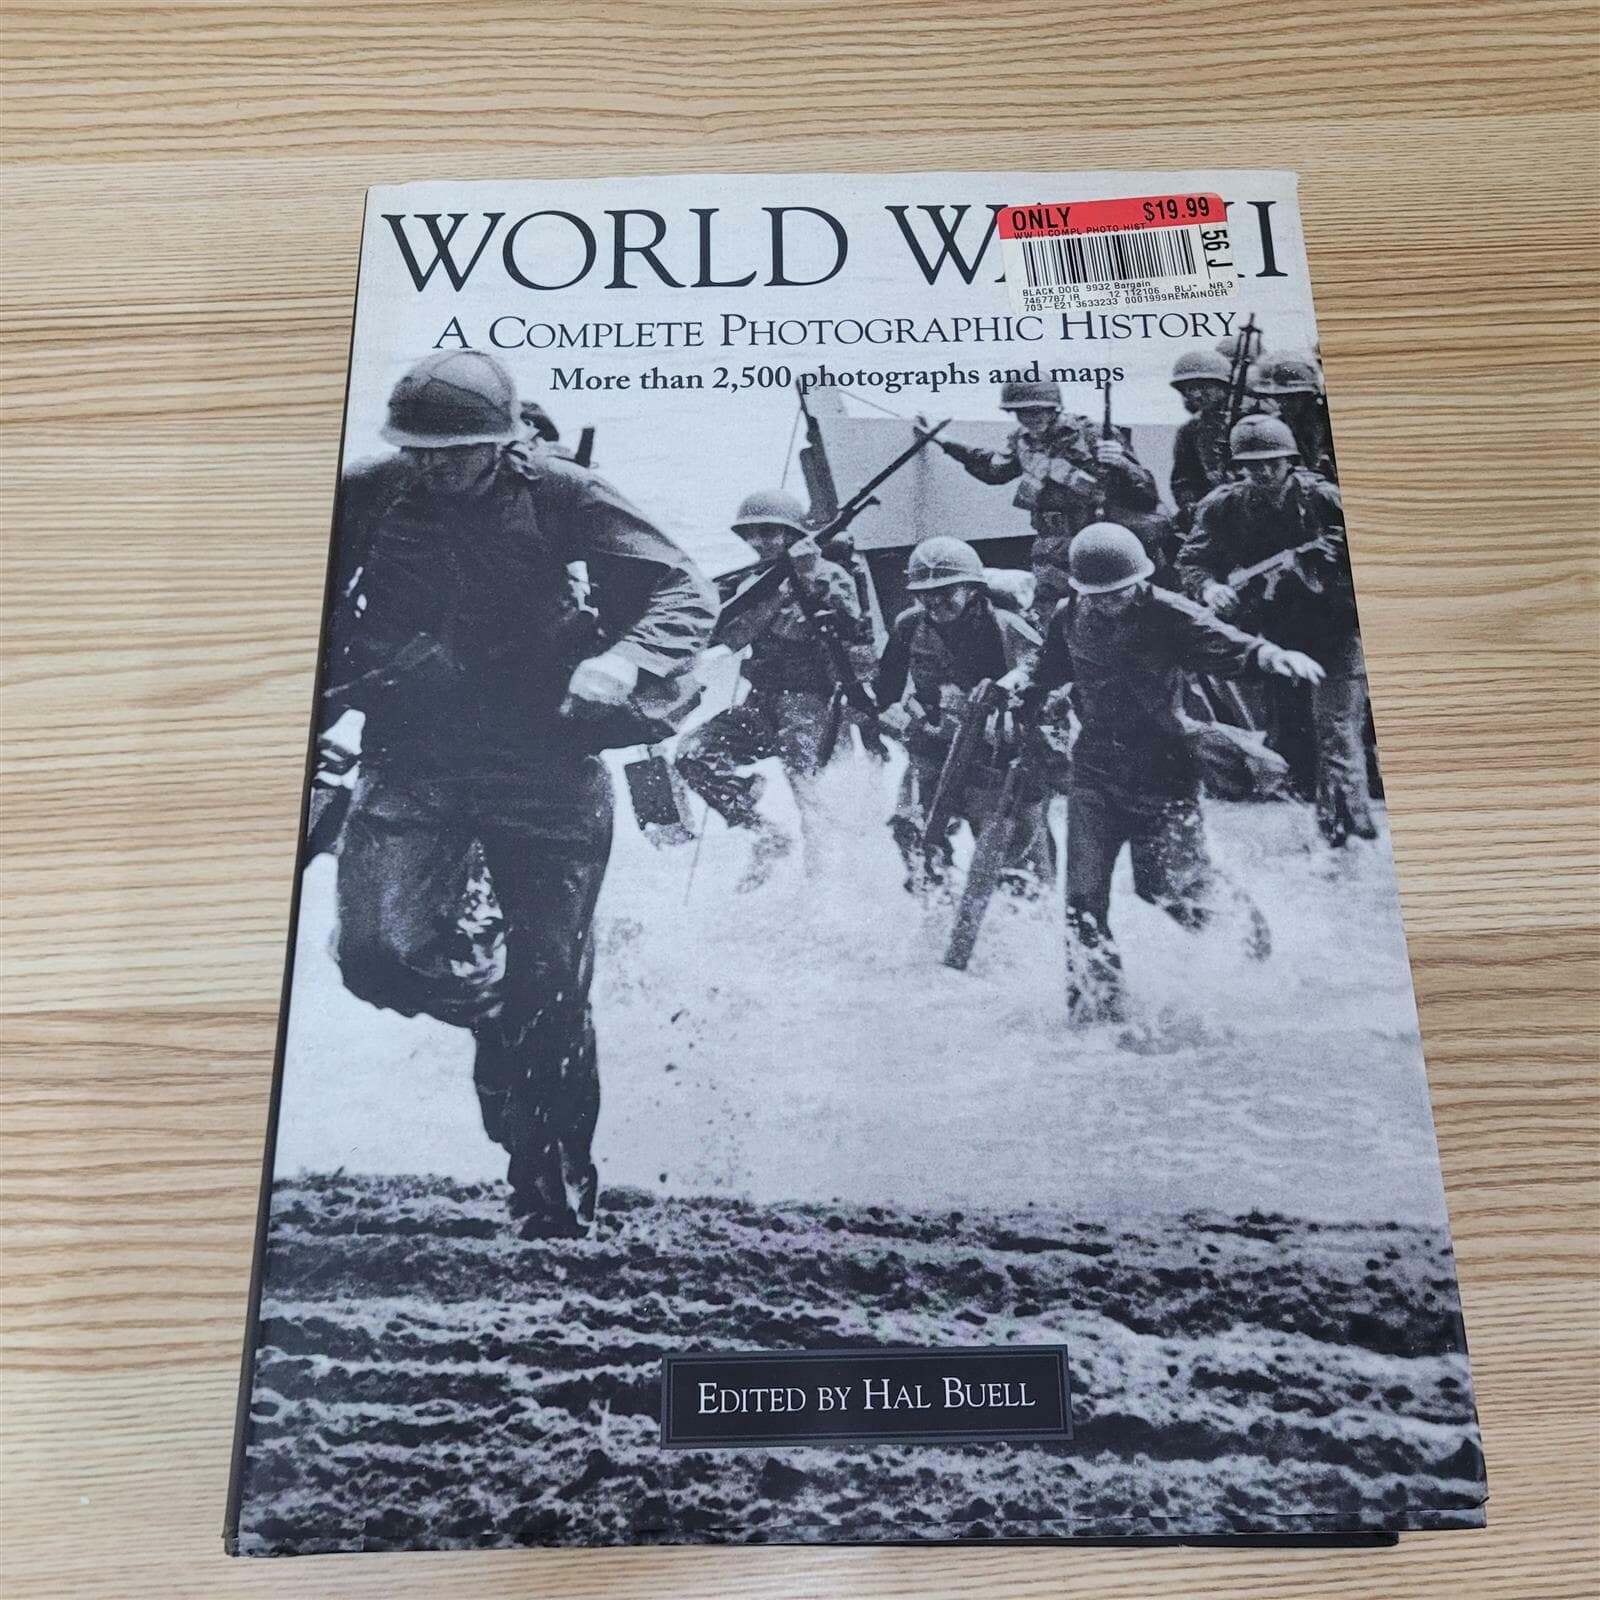 World War 2: A Complete Photographic History(Hardcover)